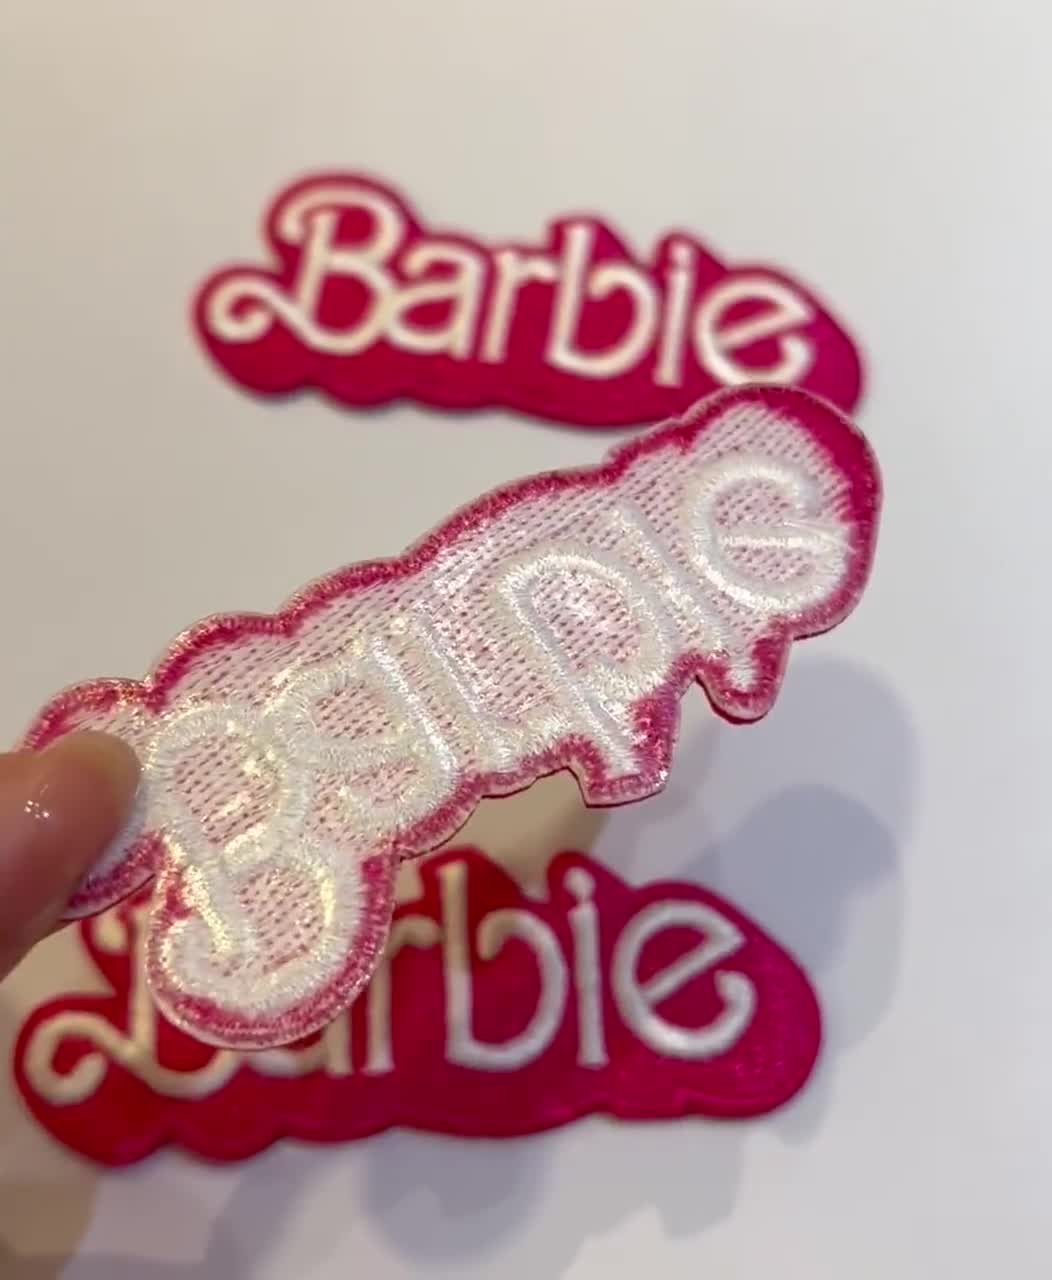 Barbie Iron on Patches, 3inch Wide, Embroidered, Heat Transfer, Kids  Appliqué, Pink Patches, Art Craft, for Fun, Princess, Diy Dress 